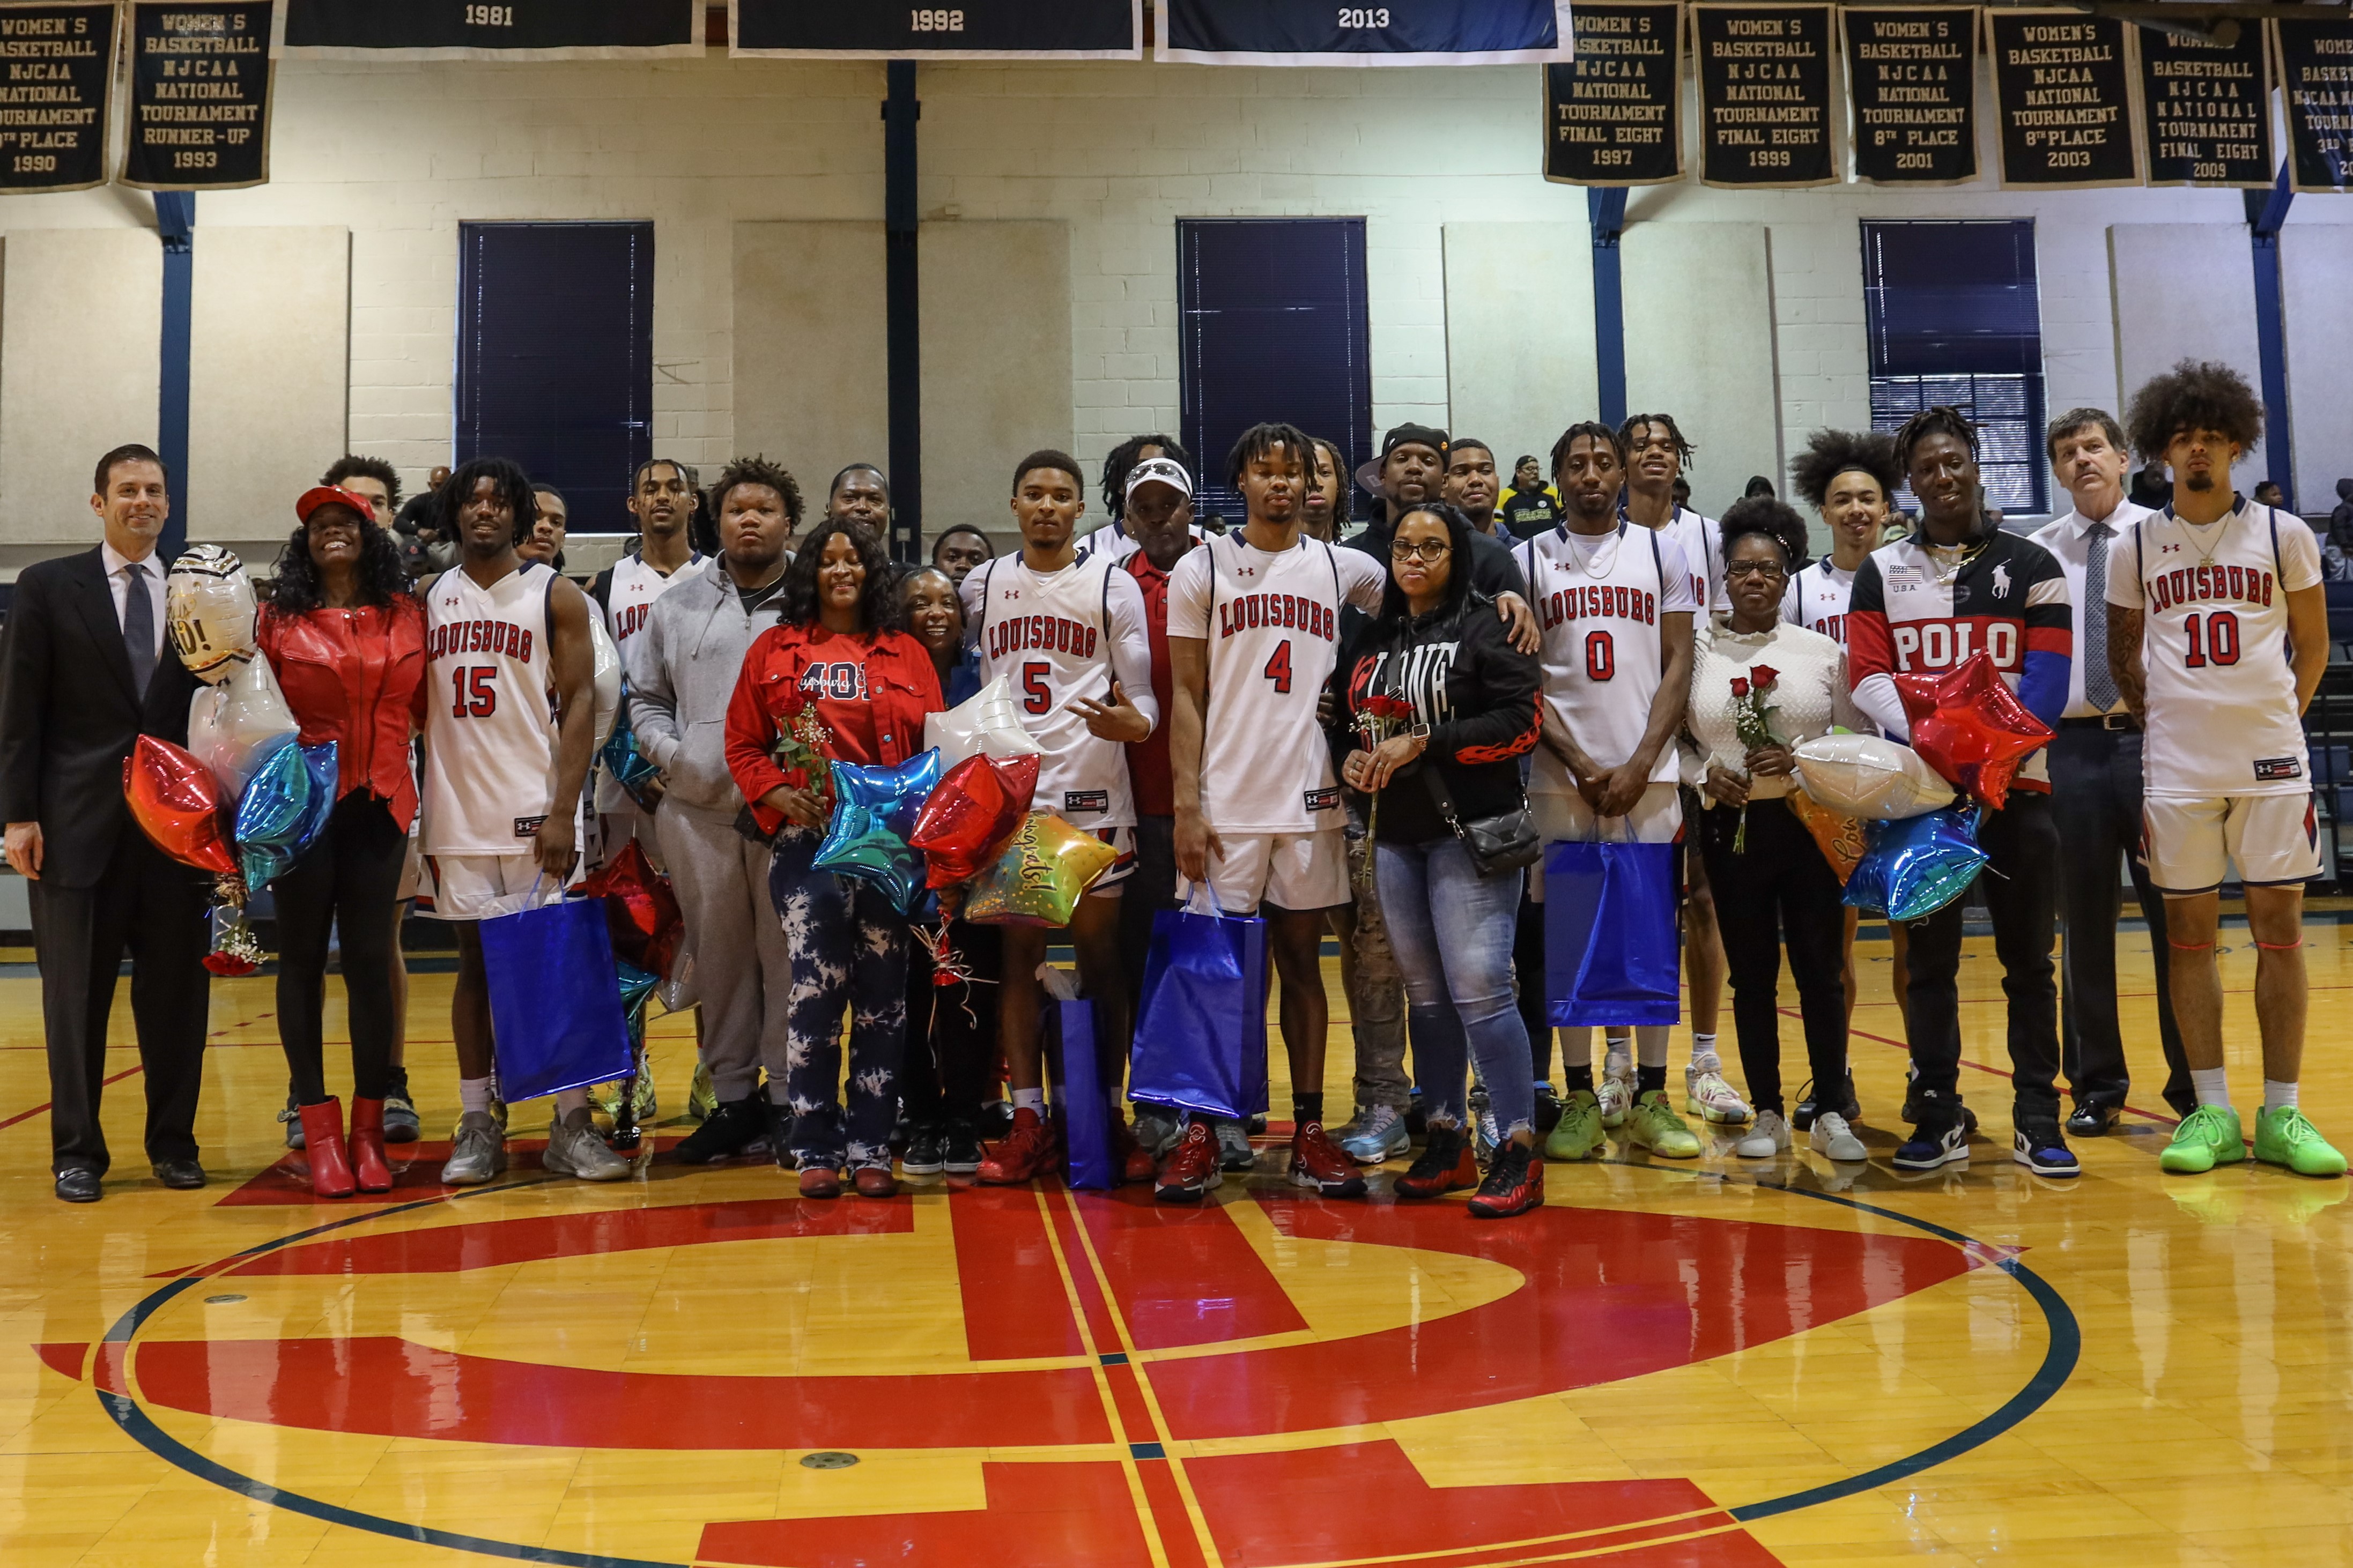 Louisburg College's Mens basketball team with friends and family.